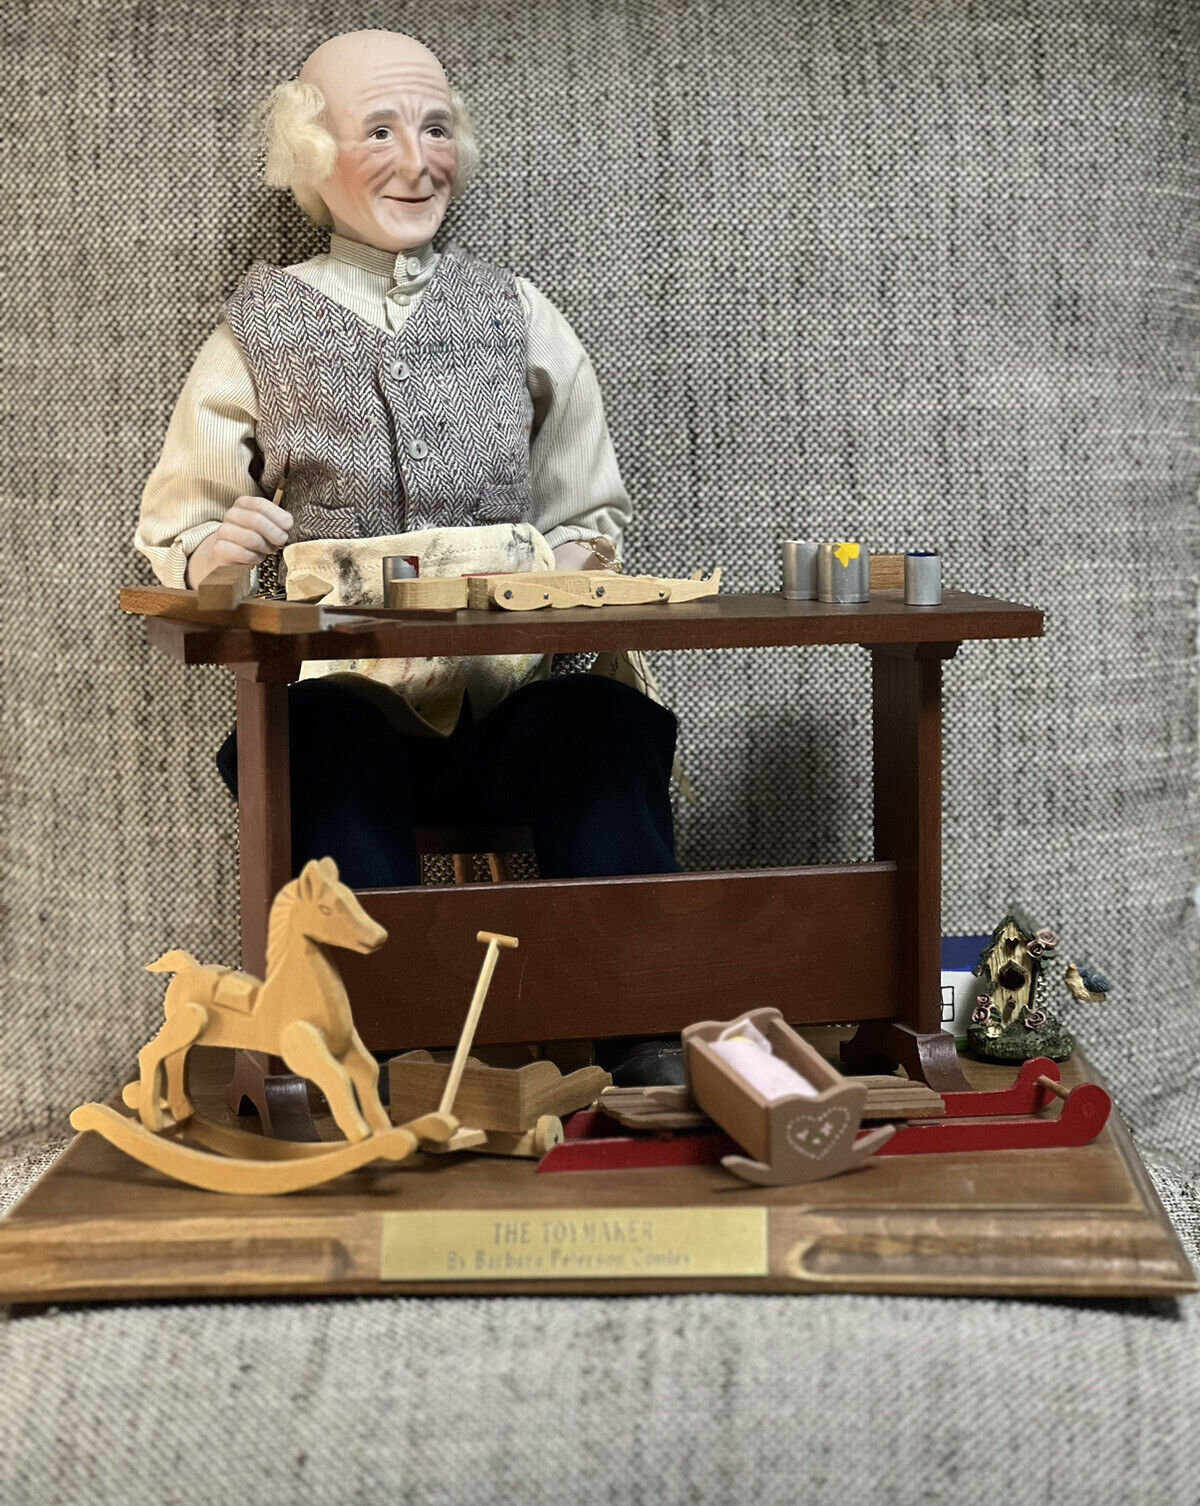 Artist Doll “The Toymaker” By Barbara Peterson Comley LE 27/350